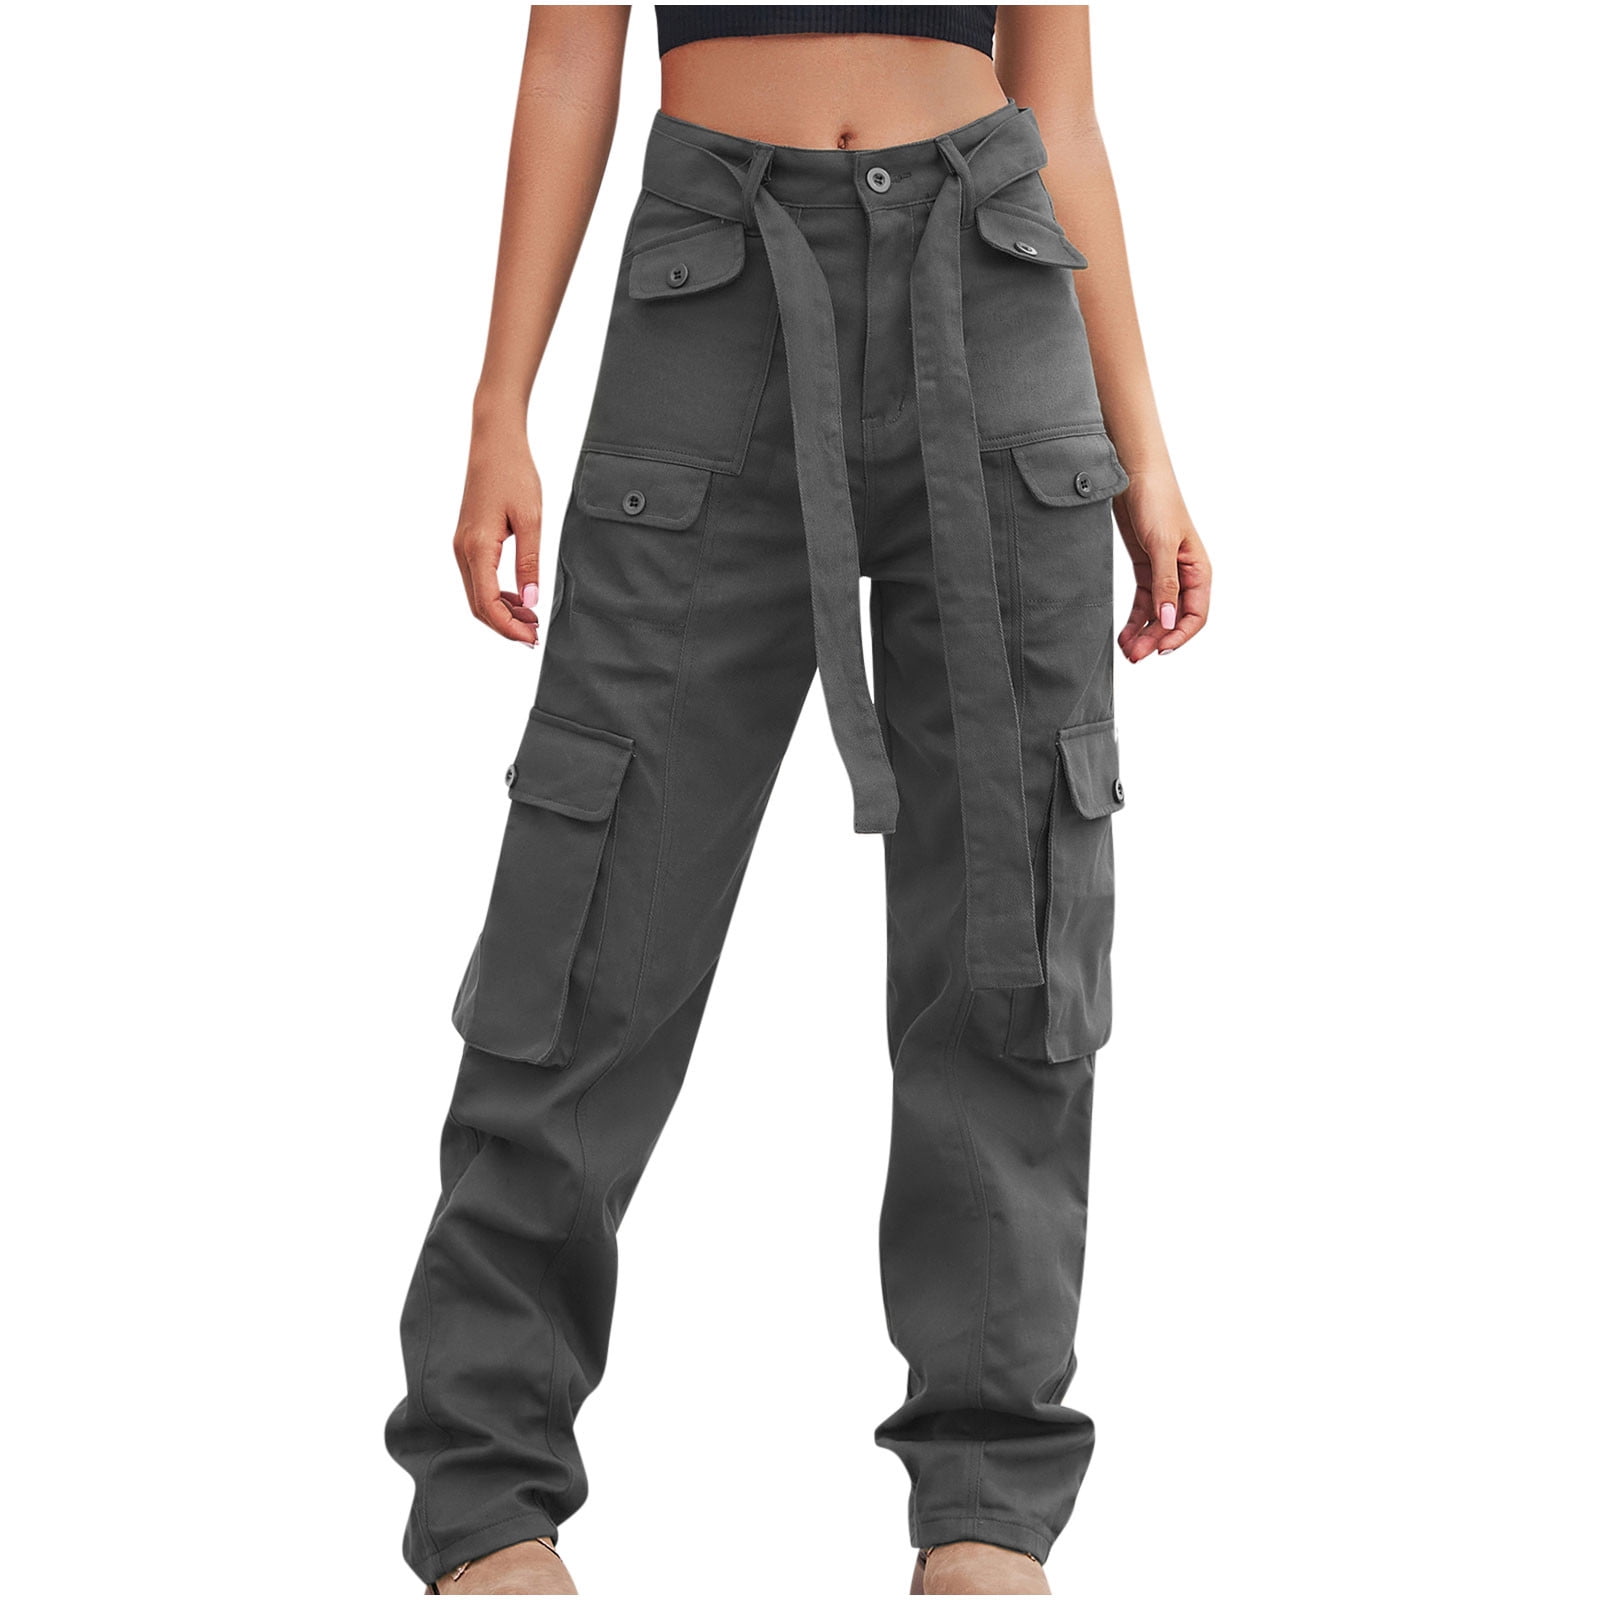 JWZUY Womens Cargo Hiking Pants with Belt Outdoor Athletic Travel Pants  Casual Loose Straight Pants with Multi Pockets Gray XL 